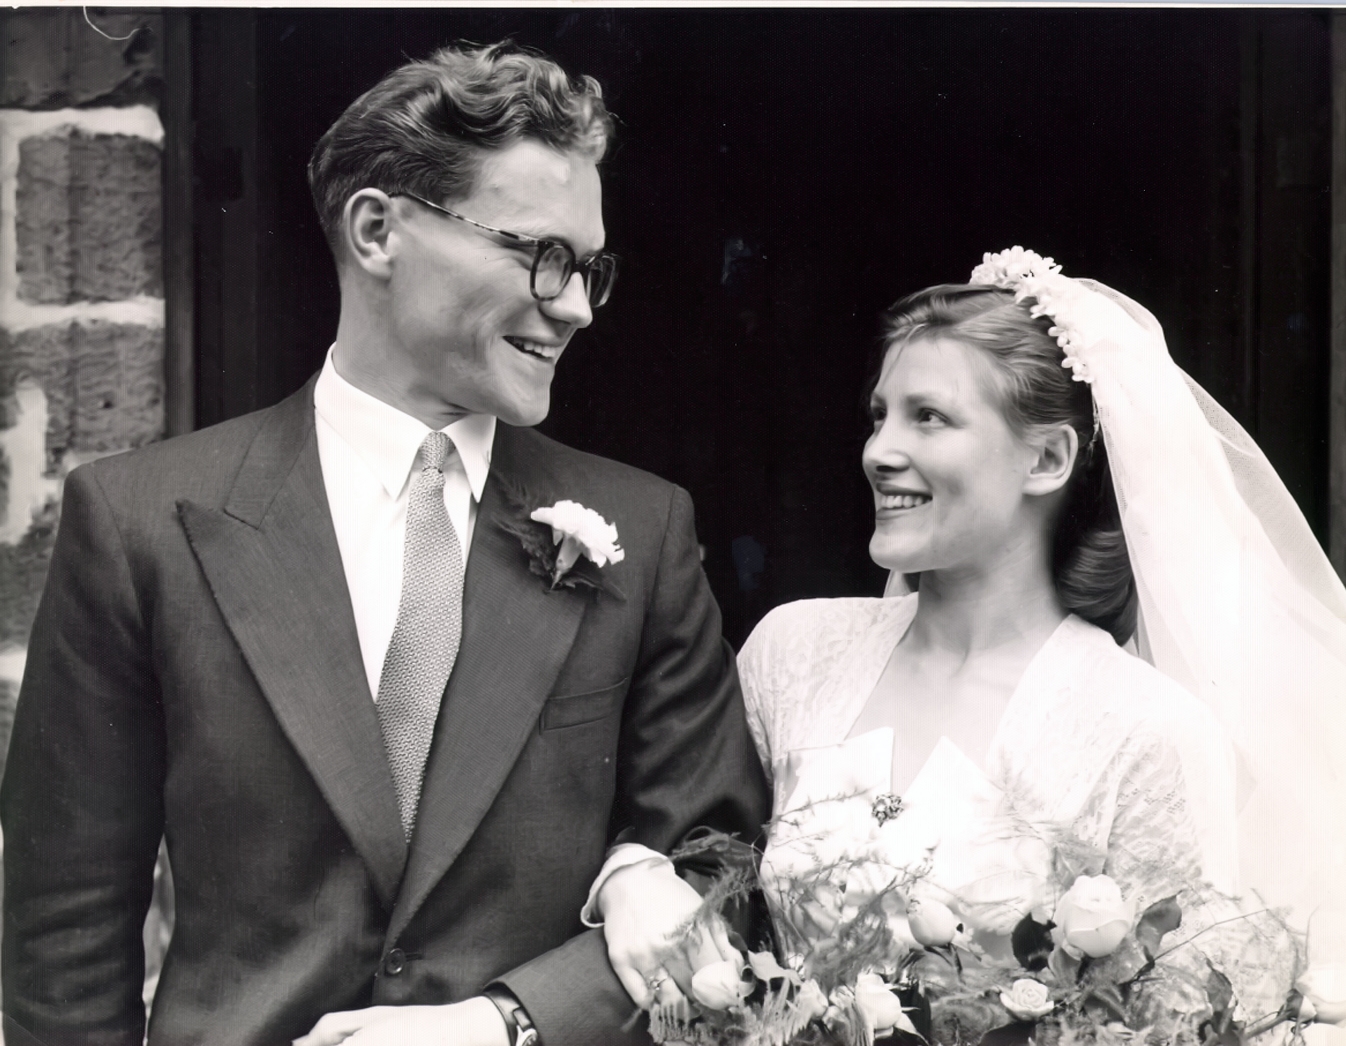 Bette and Stan wedding 1950